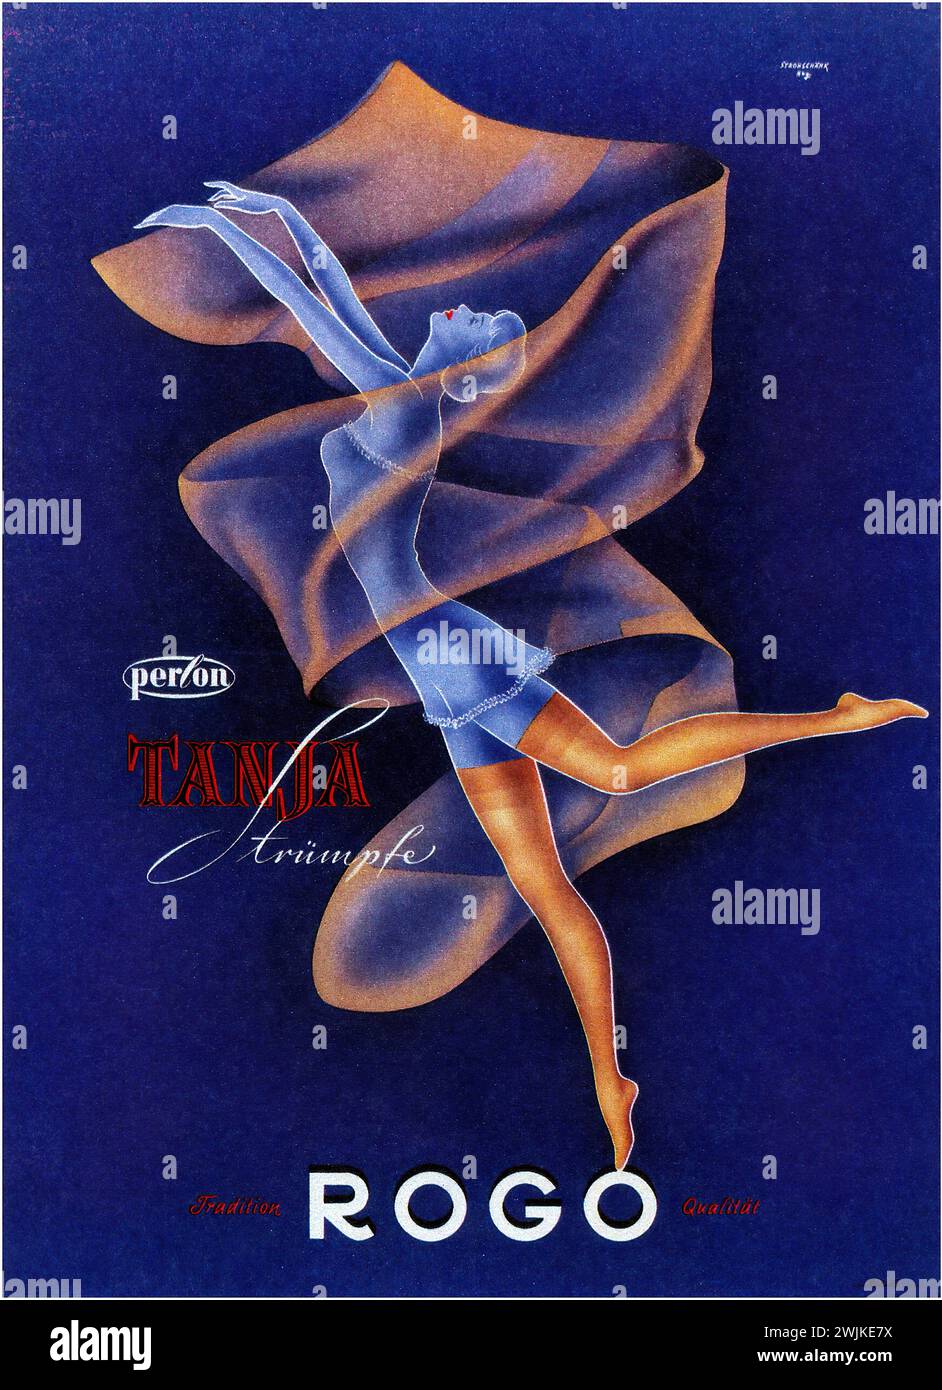 'Perlon Tanja Strümpfe ROGO' ['Perlon Tanja Stockings ROGO'] Vintage German Advertising illustrating a dancer with flowing stockings, emphasizing style and movement in a realistic illustration style Stock Photo